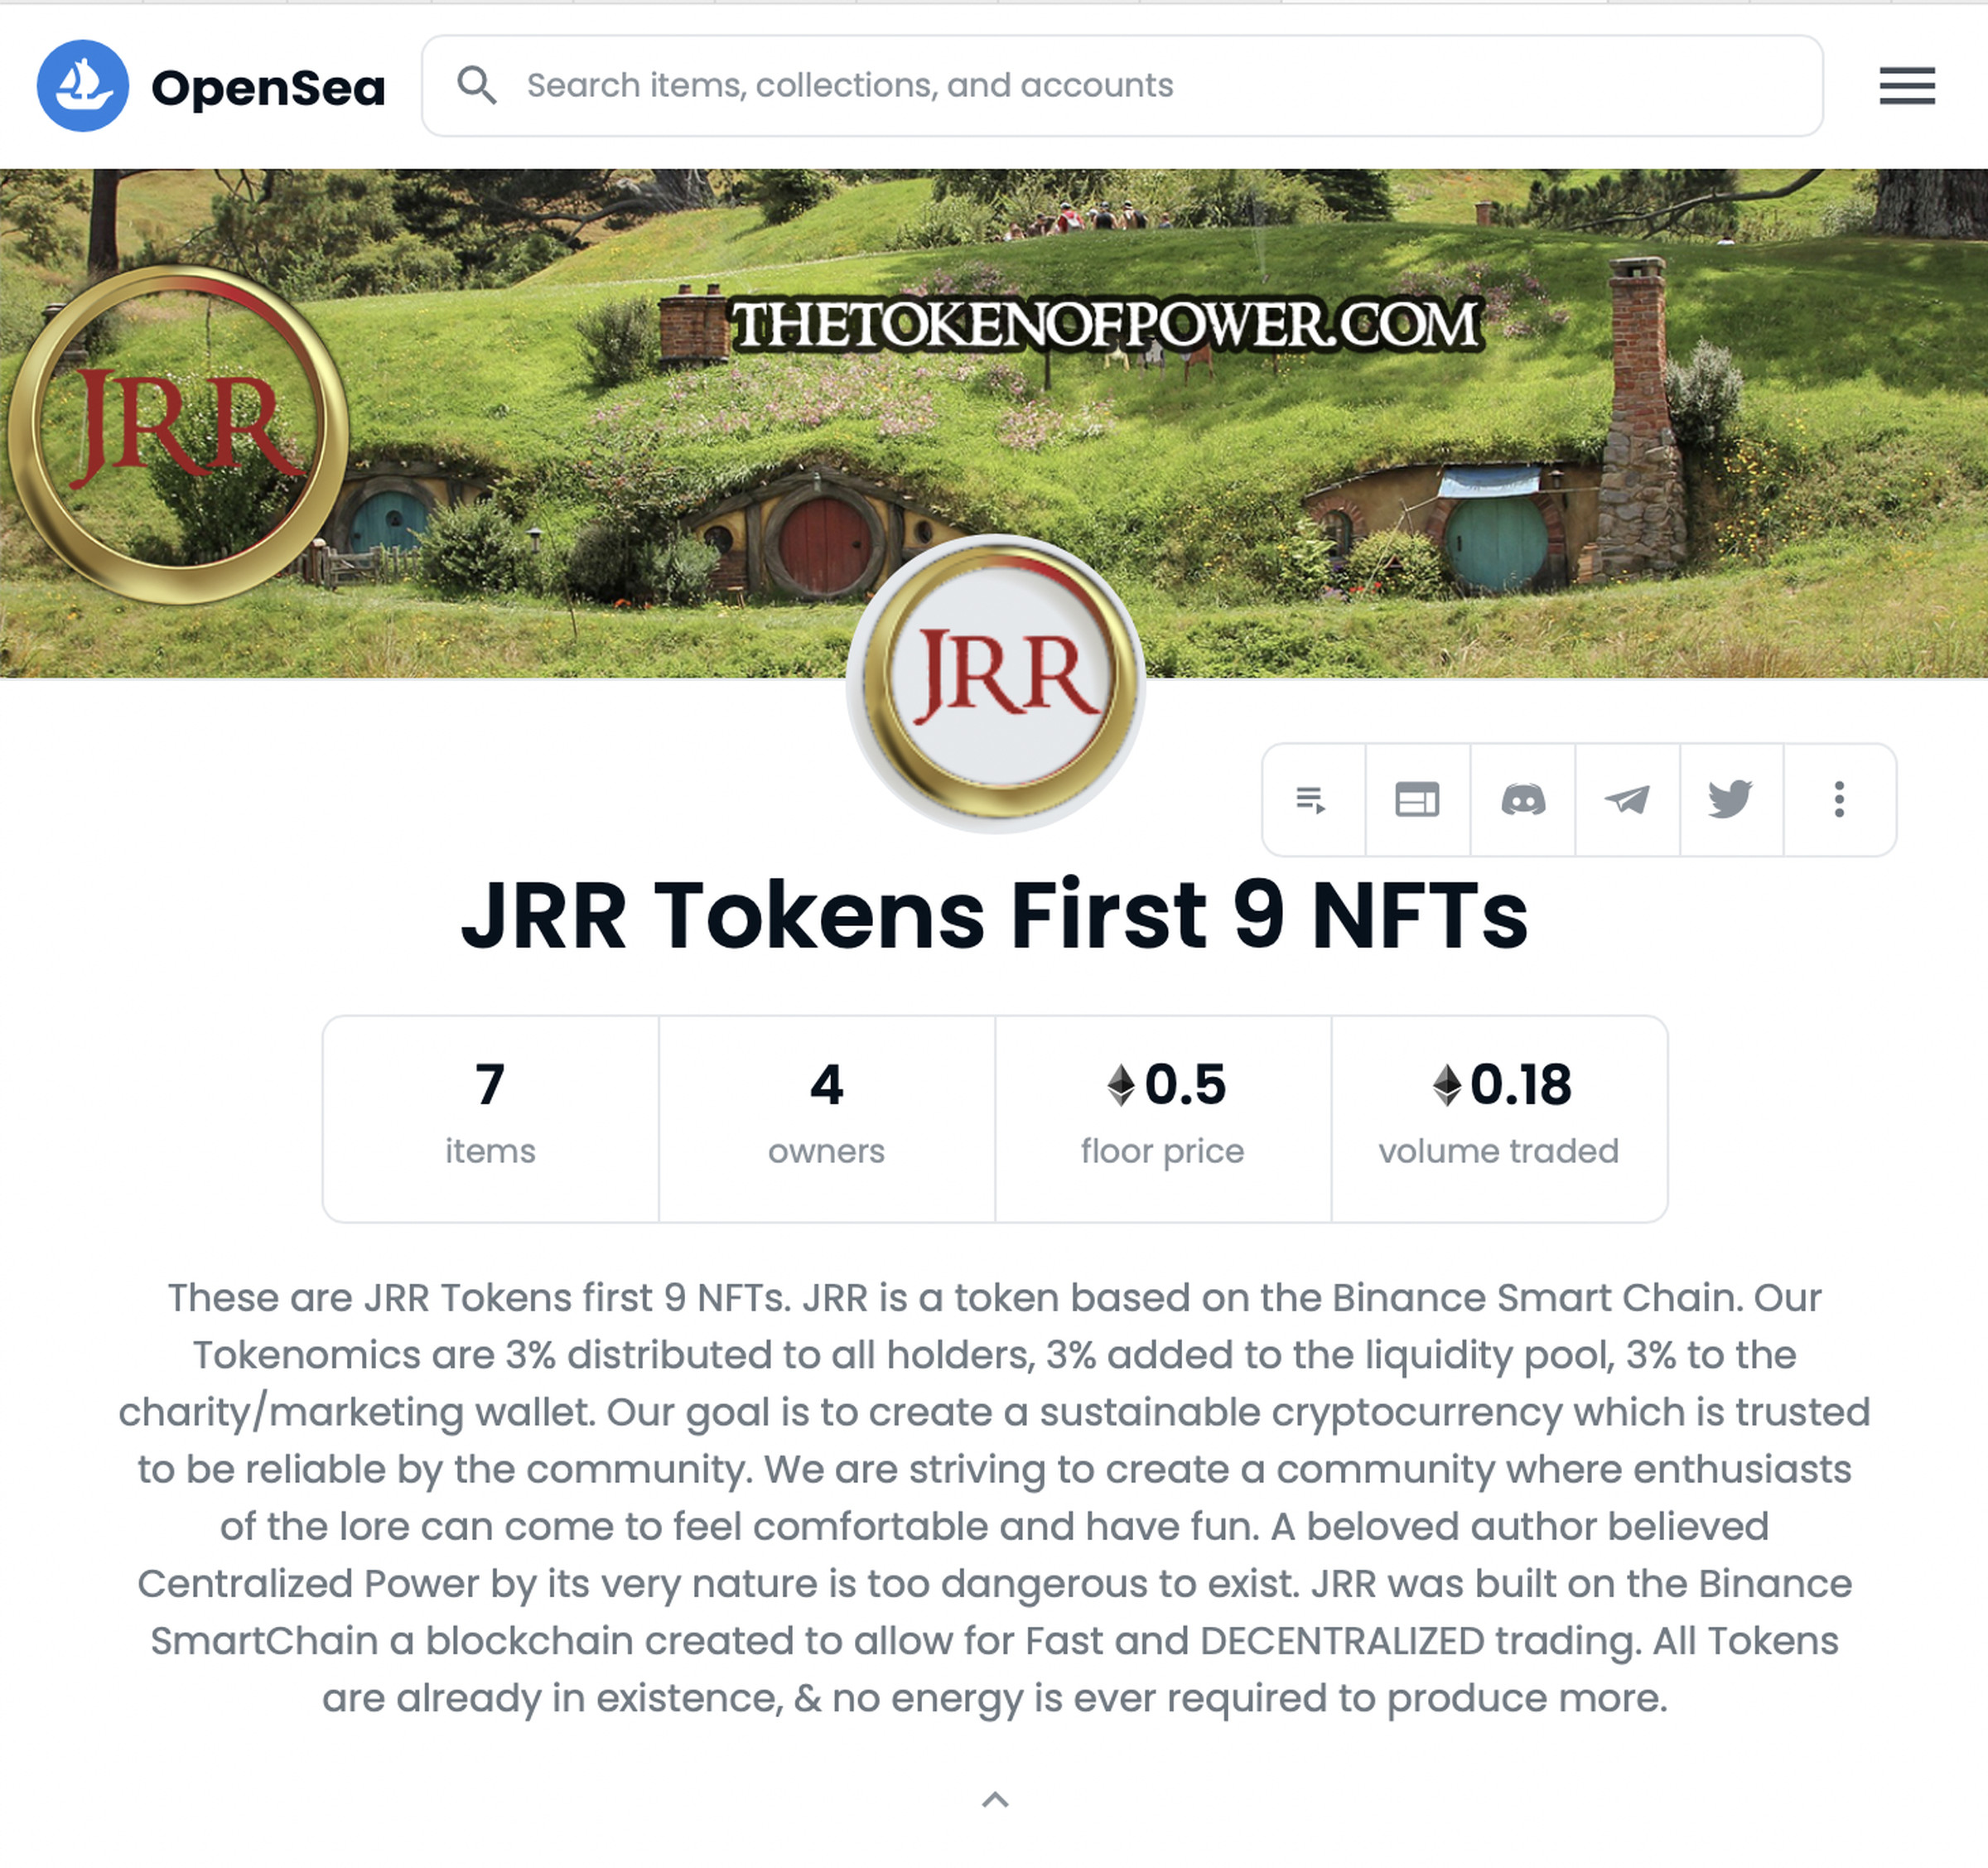 This may be the last haven for JRR Token’s online presence.